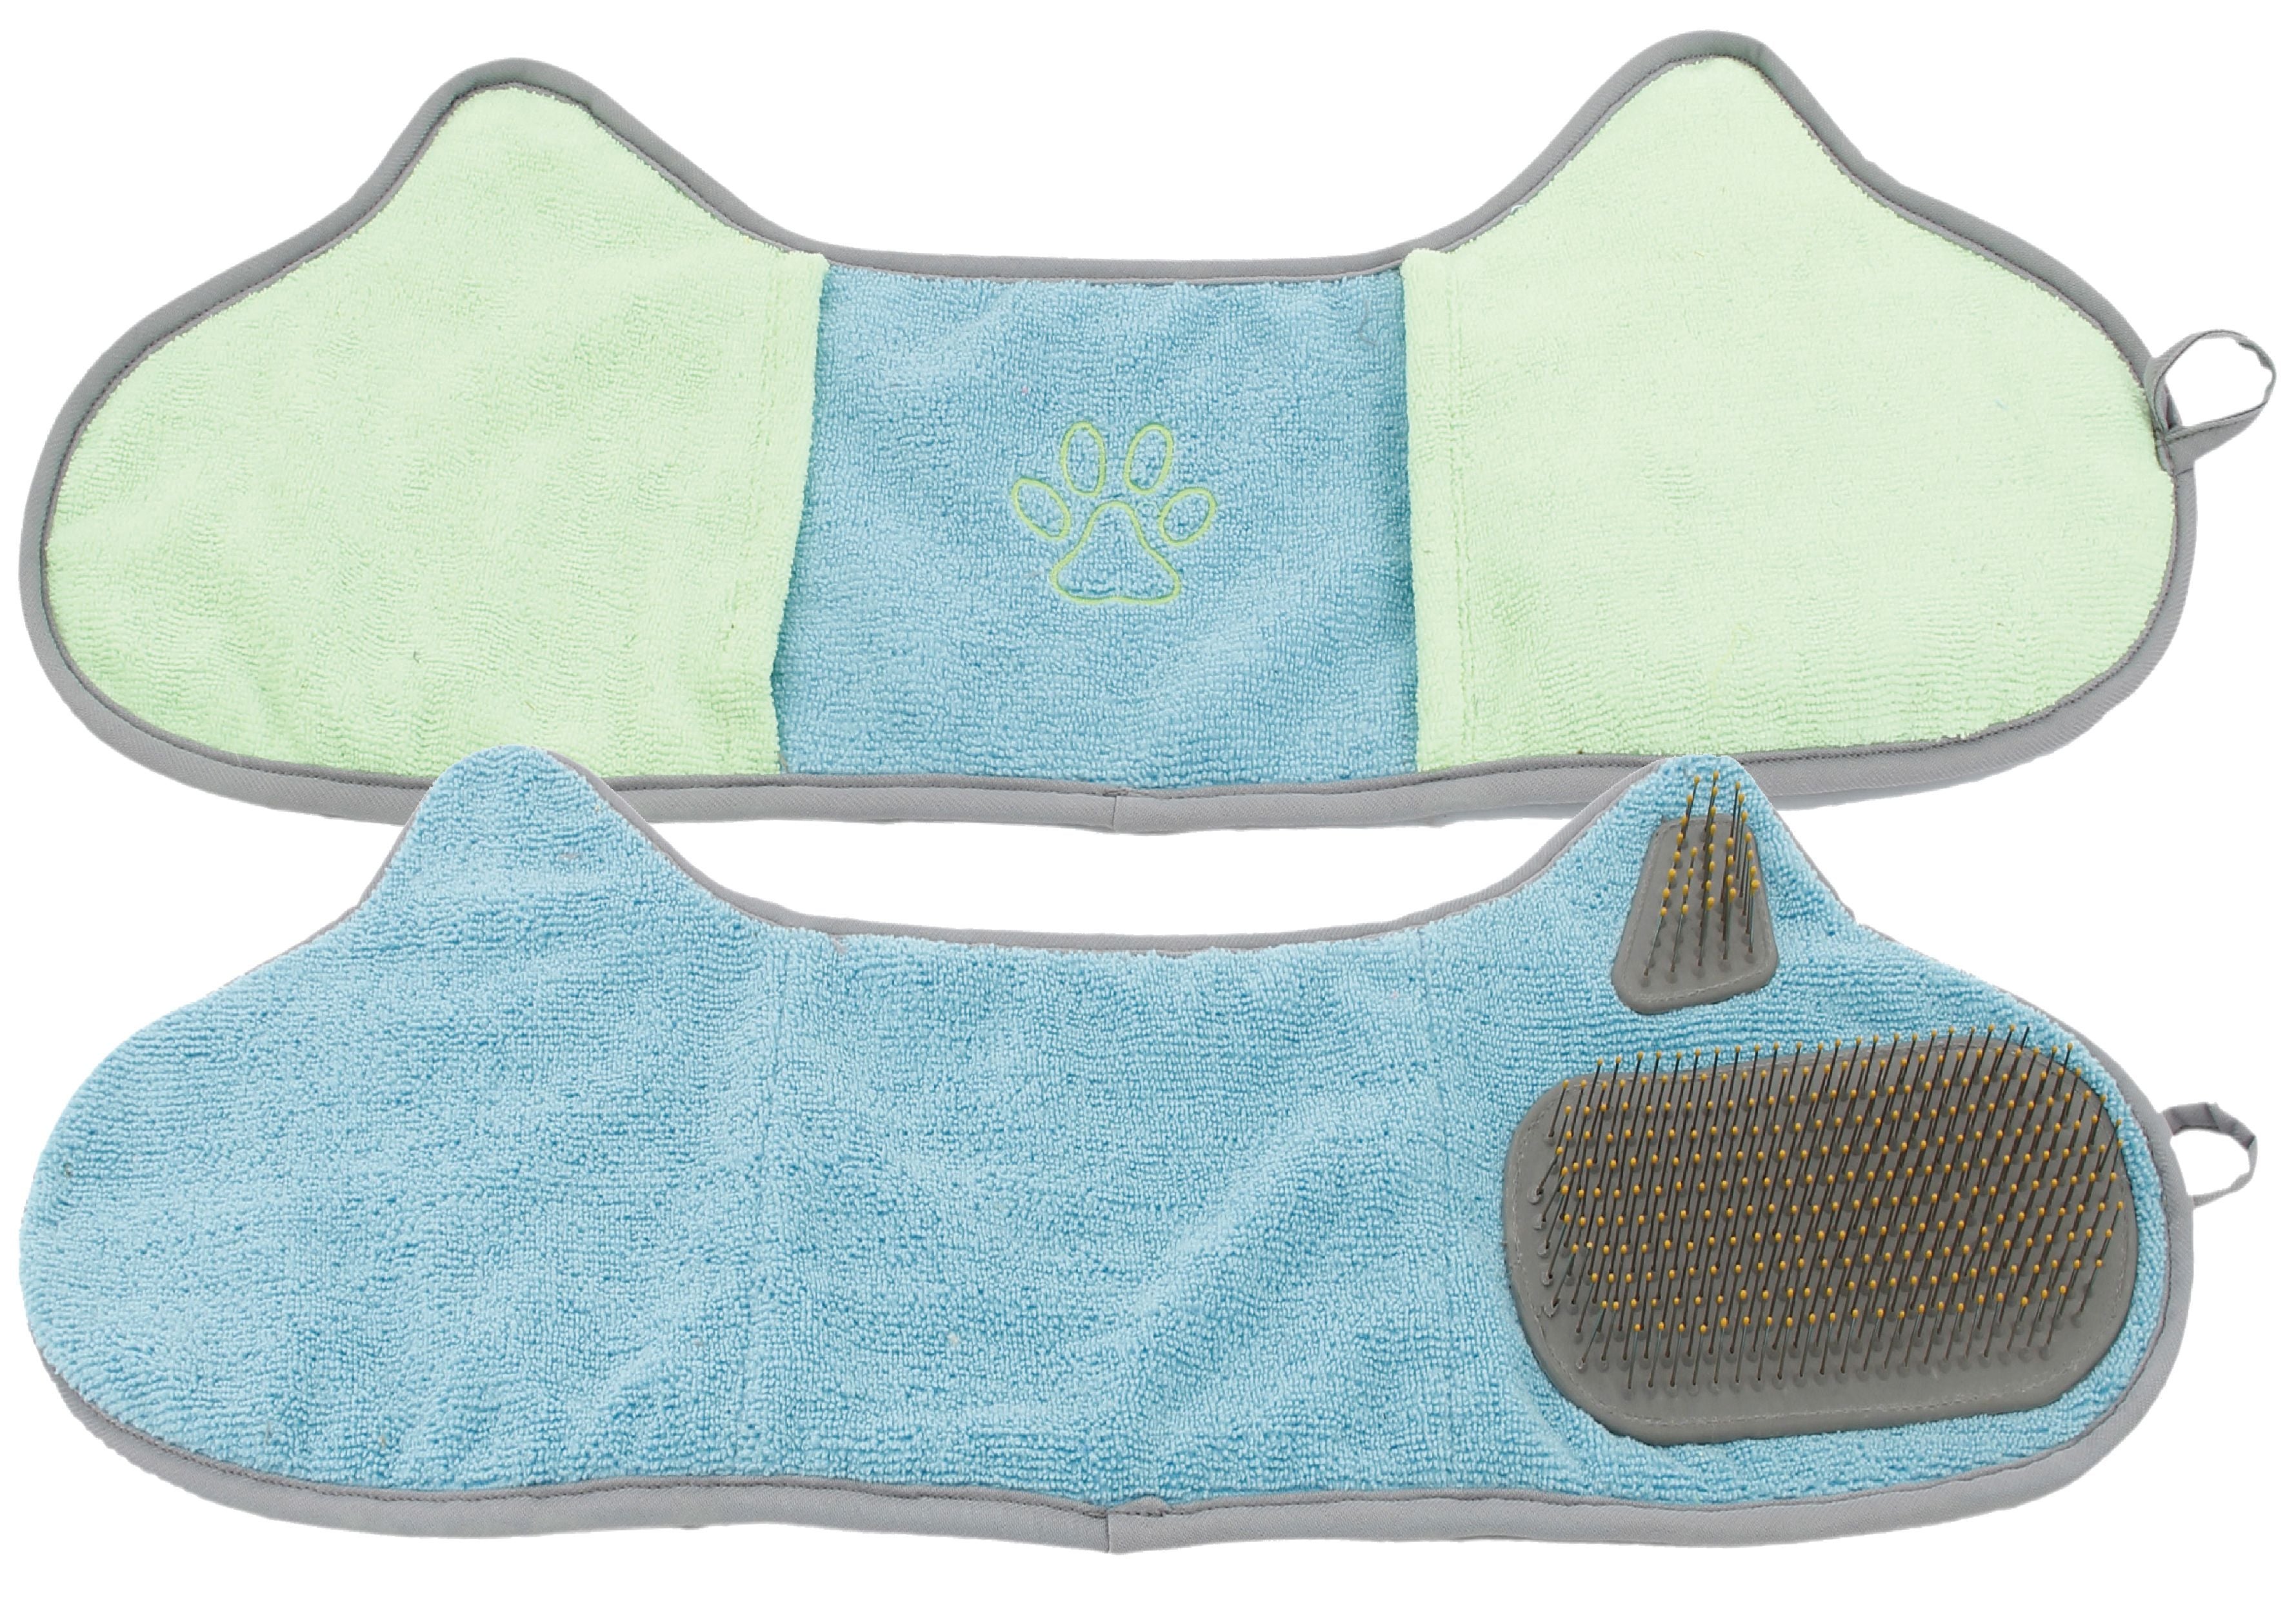 Pet Life ® 'Bryer' 2-in-1 Hand-Inserted Microfiber Pet Grooming Towel And Brush - One Size - Blue / Aqua